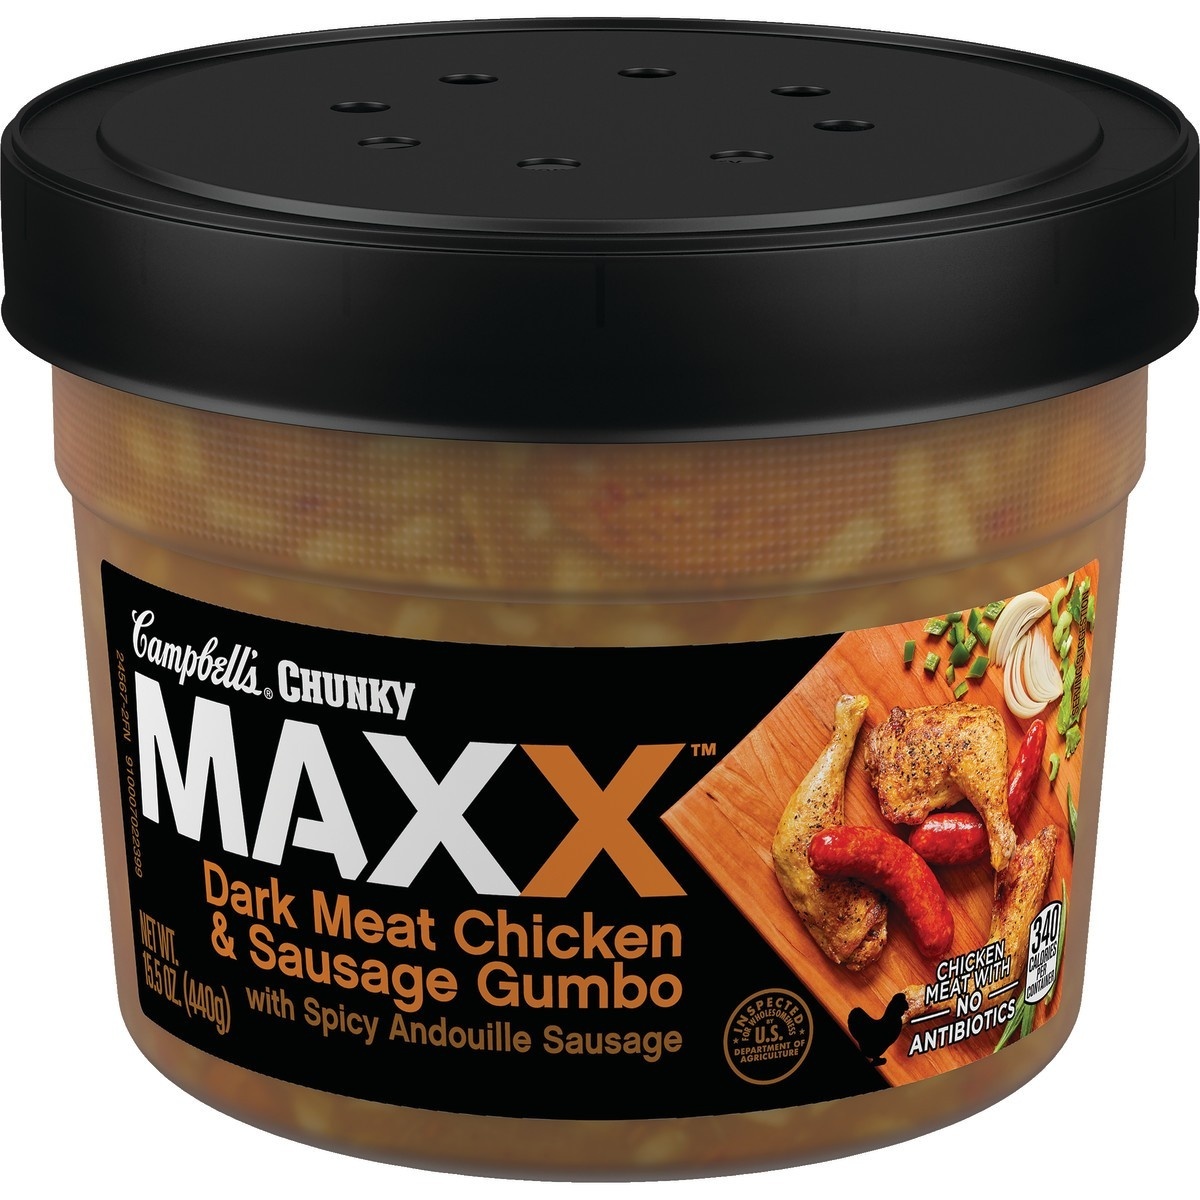 slide 1 of 6, Campbell's Chunky Maxx Dark Meat Chicken and Sausage Gumbo with Spicy Andouille Sausage Soup, 15.5 oz